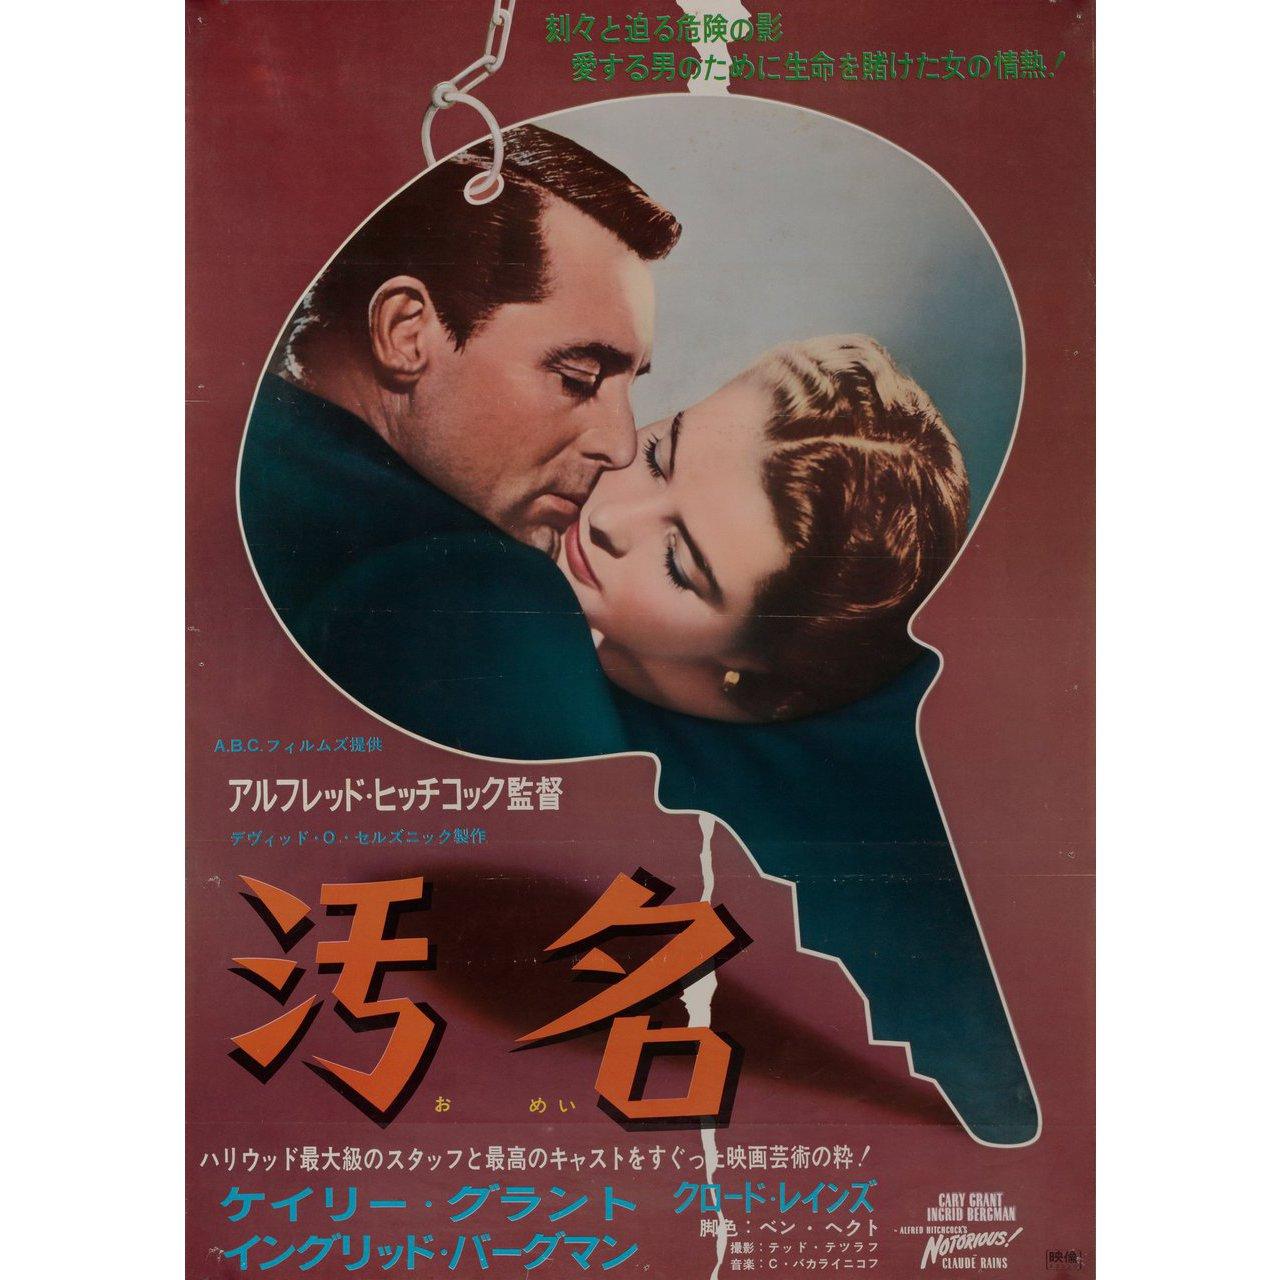 Original 1967 re-release Japanese B2 poster for the 1946 film Notorious directed by Alfred Hitchcock with Cary Grant / Ingrid Bergman / Claude Rains / Louis Calhern. Very Good condition, folded with pinholes & other wear. Many original posters were